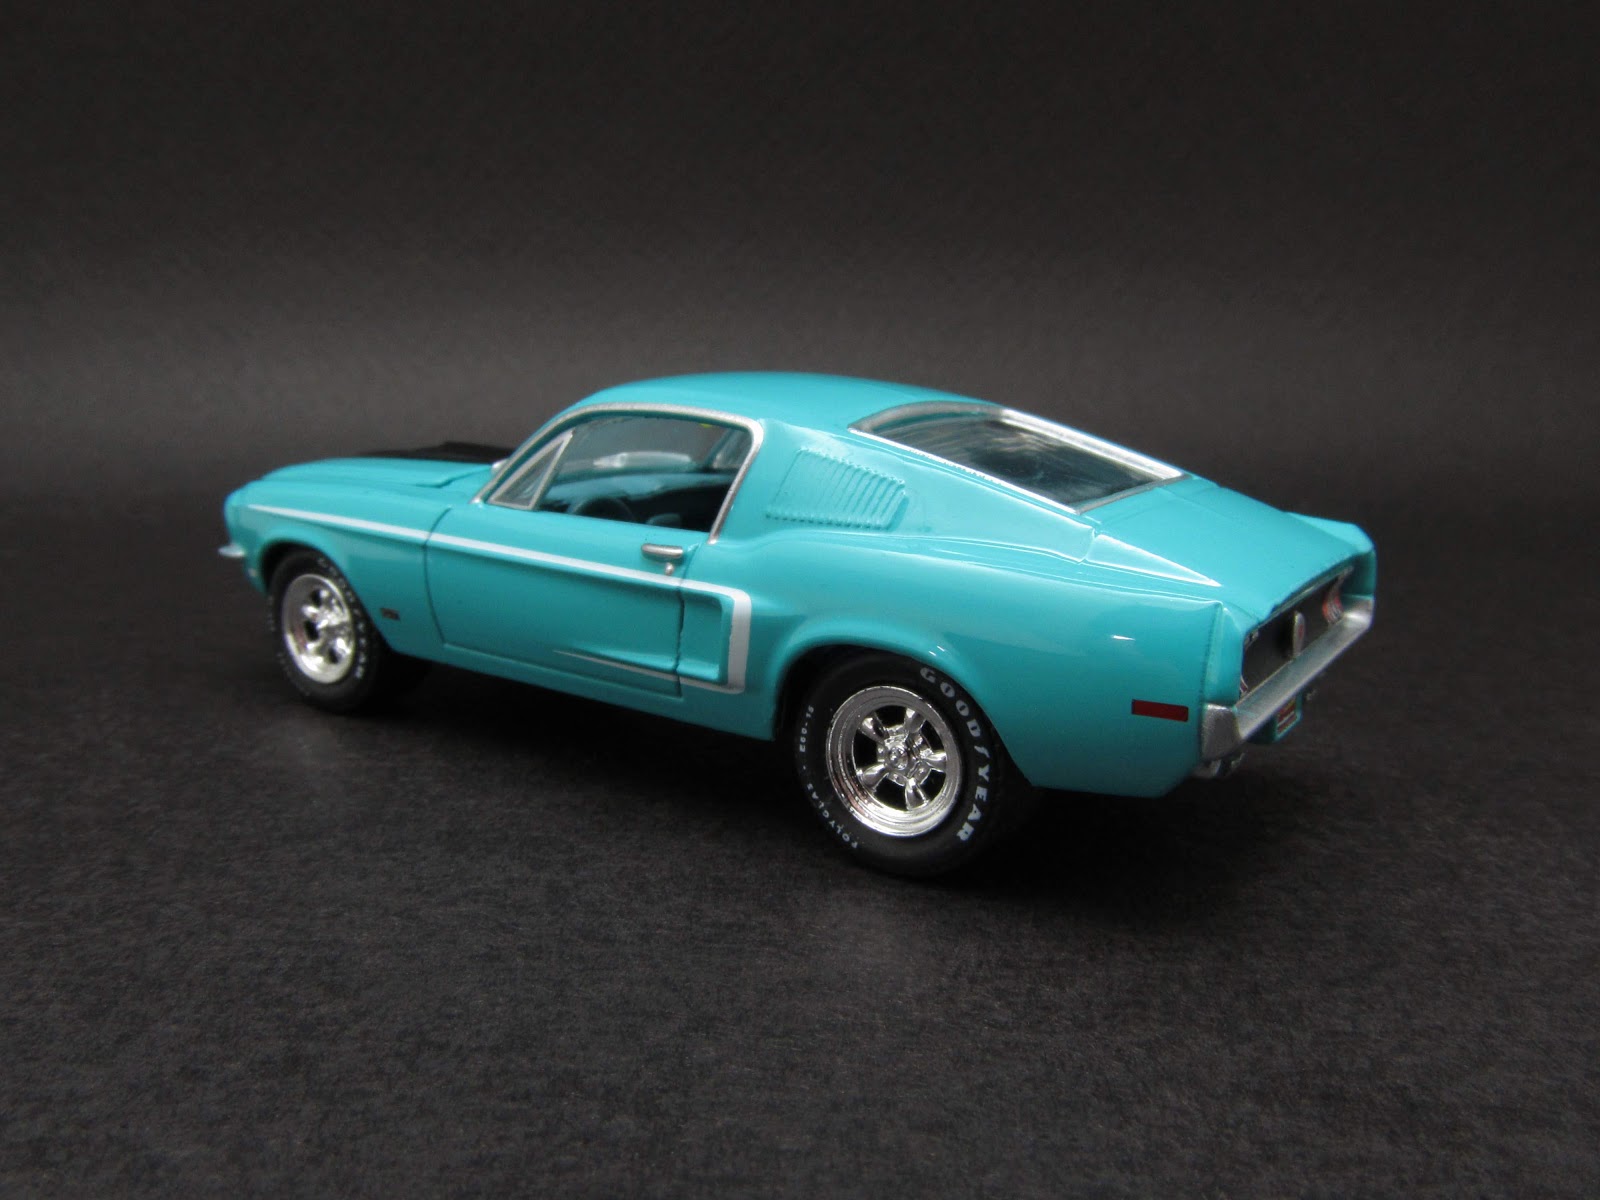 Diecast Hobbist: 1968 Ford Mustang GT 2+2 Fastback